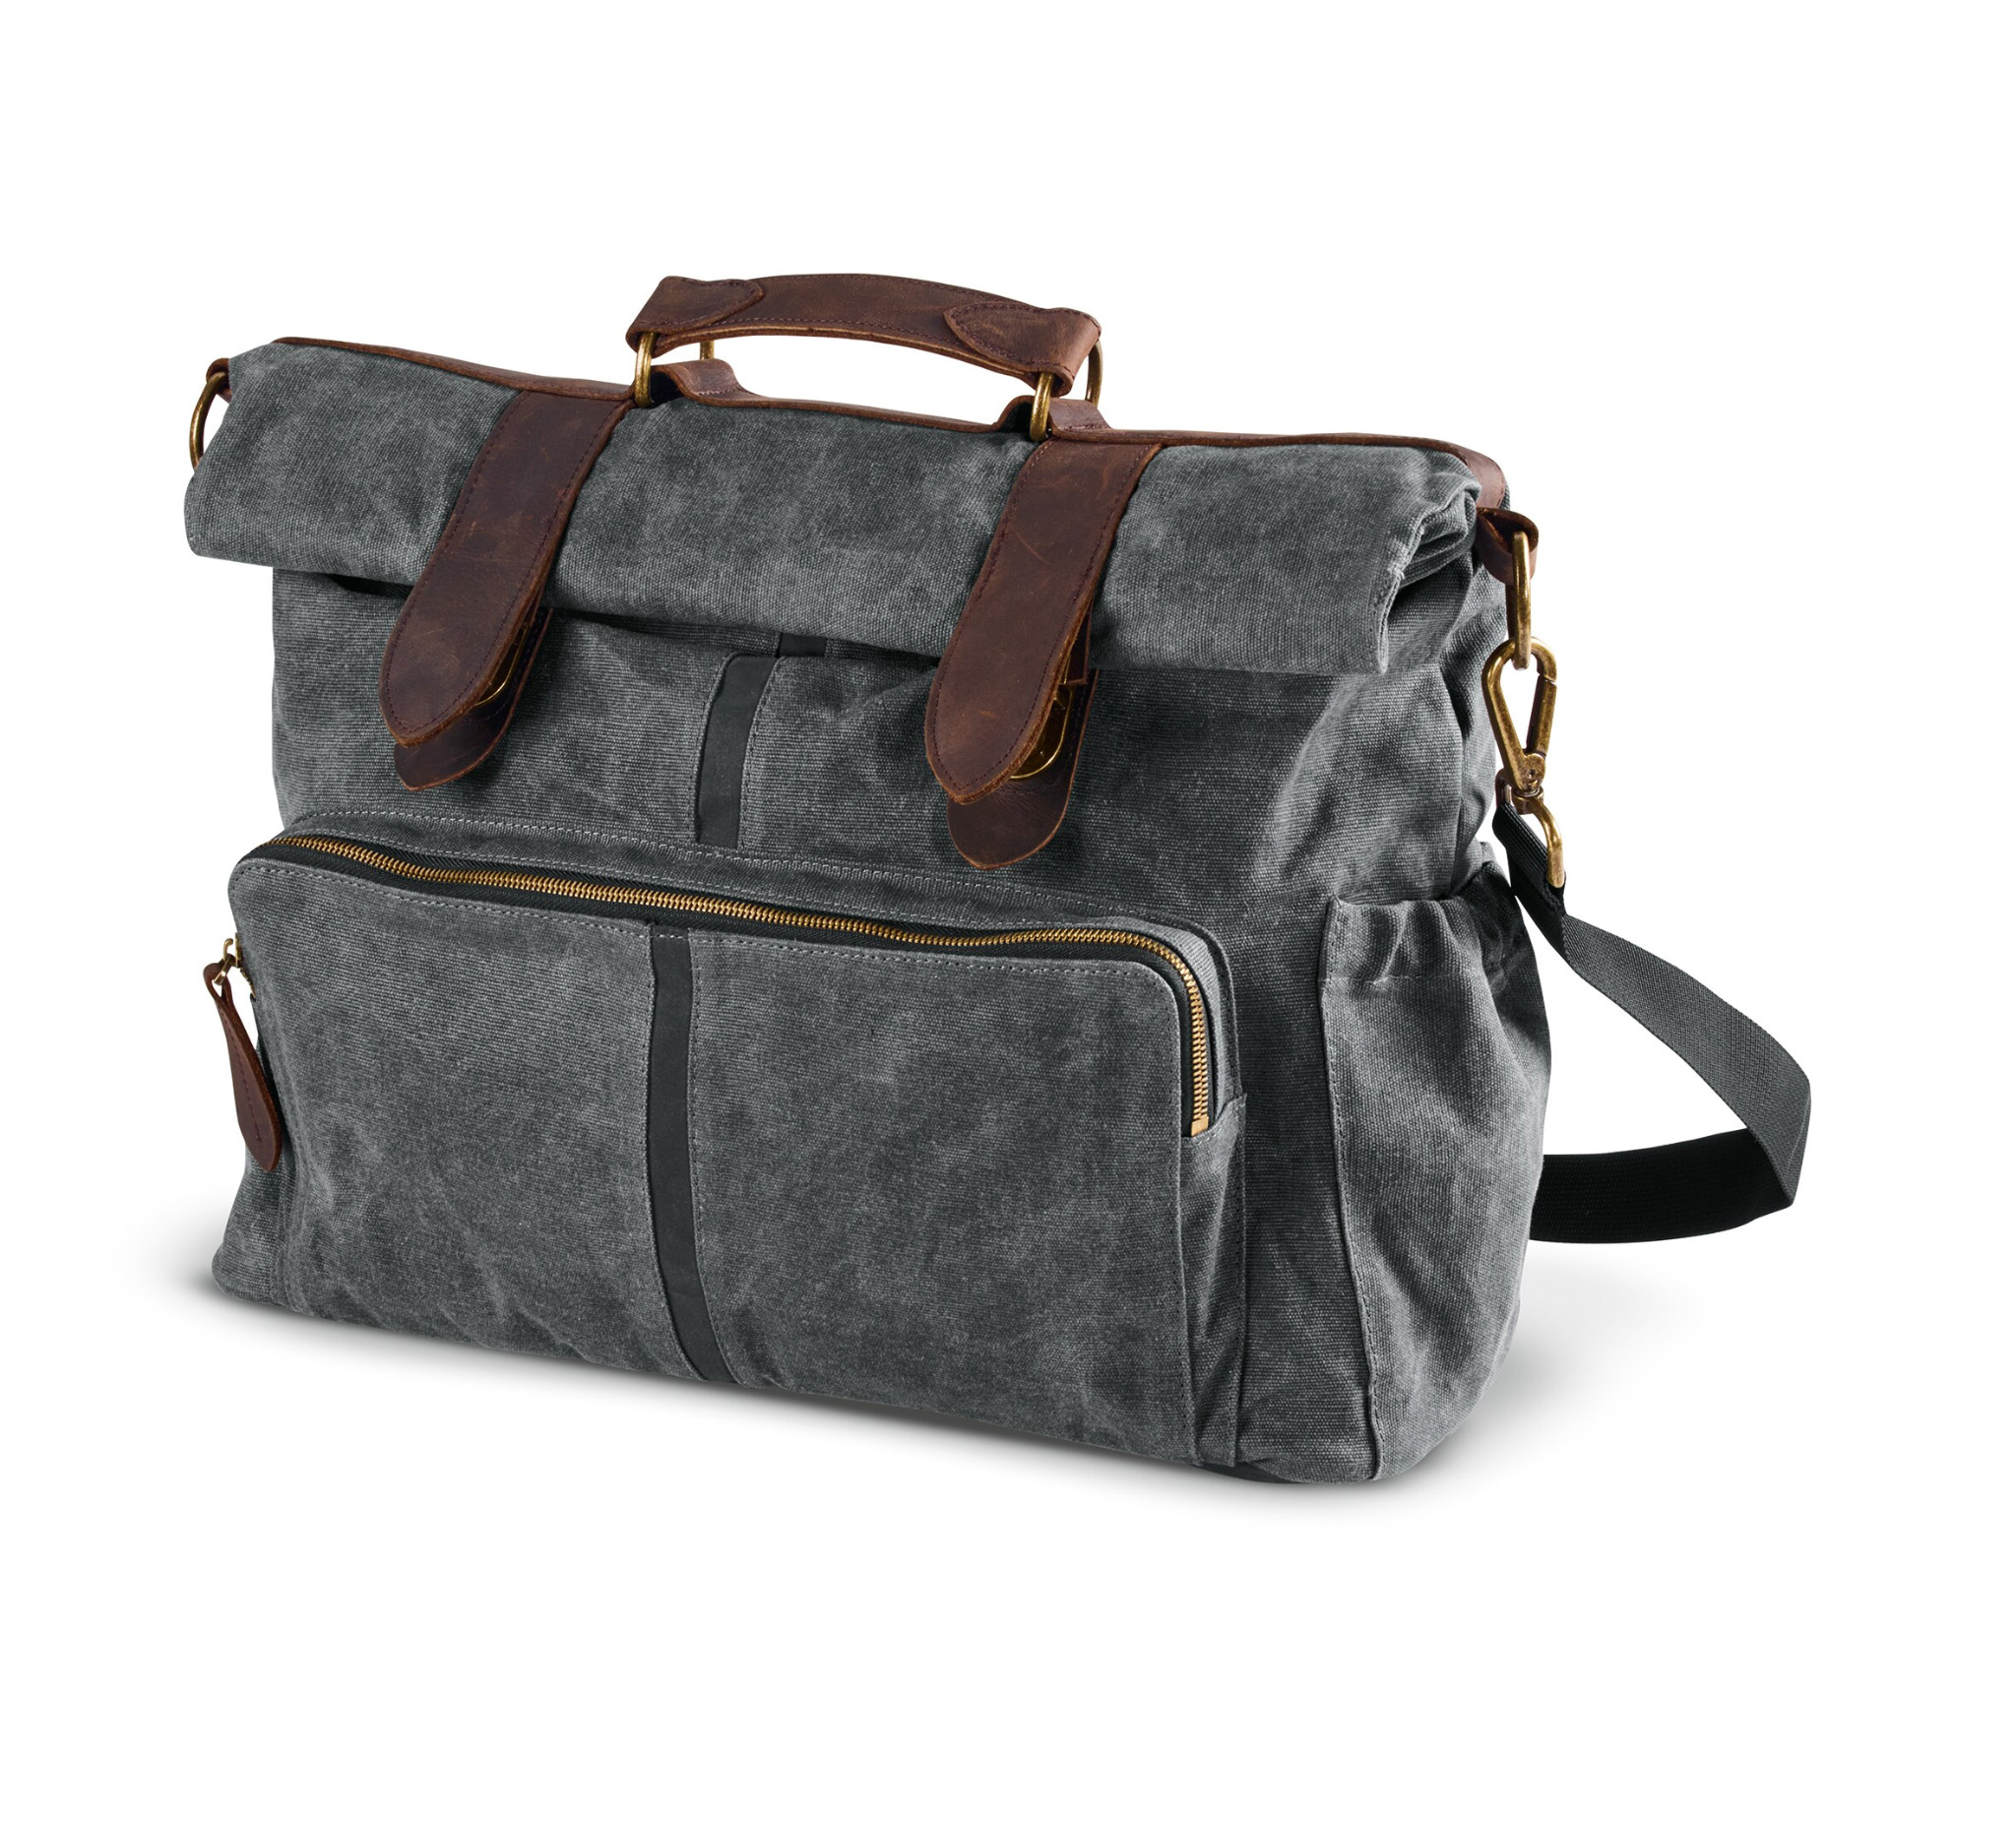 Alchemy Goods Urban Messenger bag MADE IN SEATTLE USA - MISSION WEB STORE